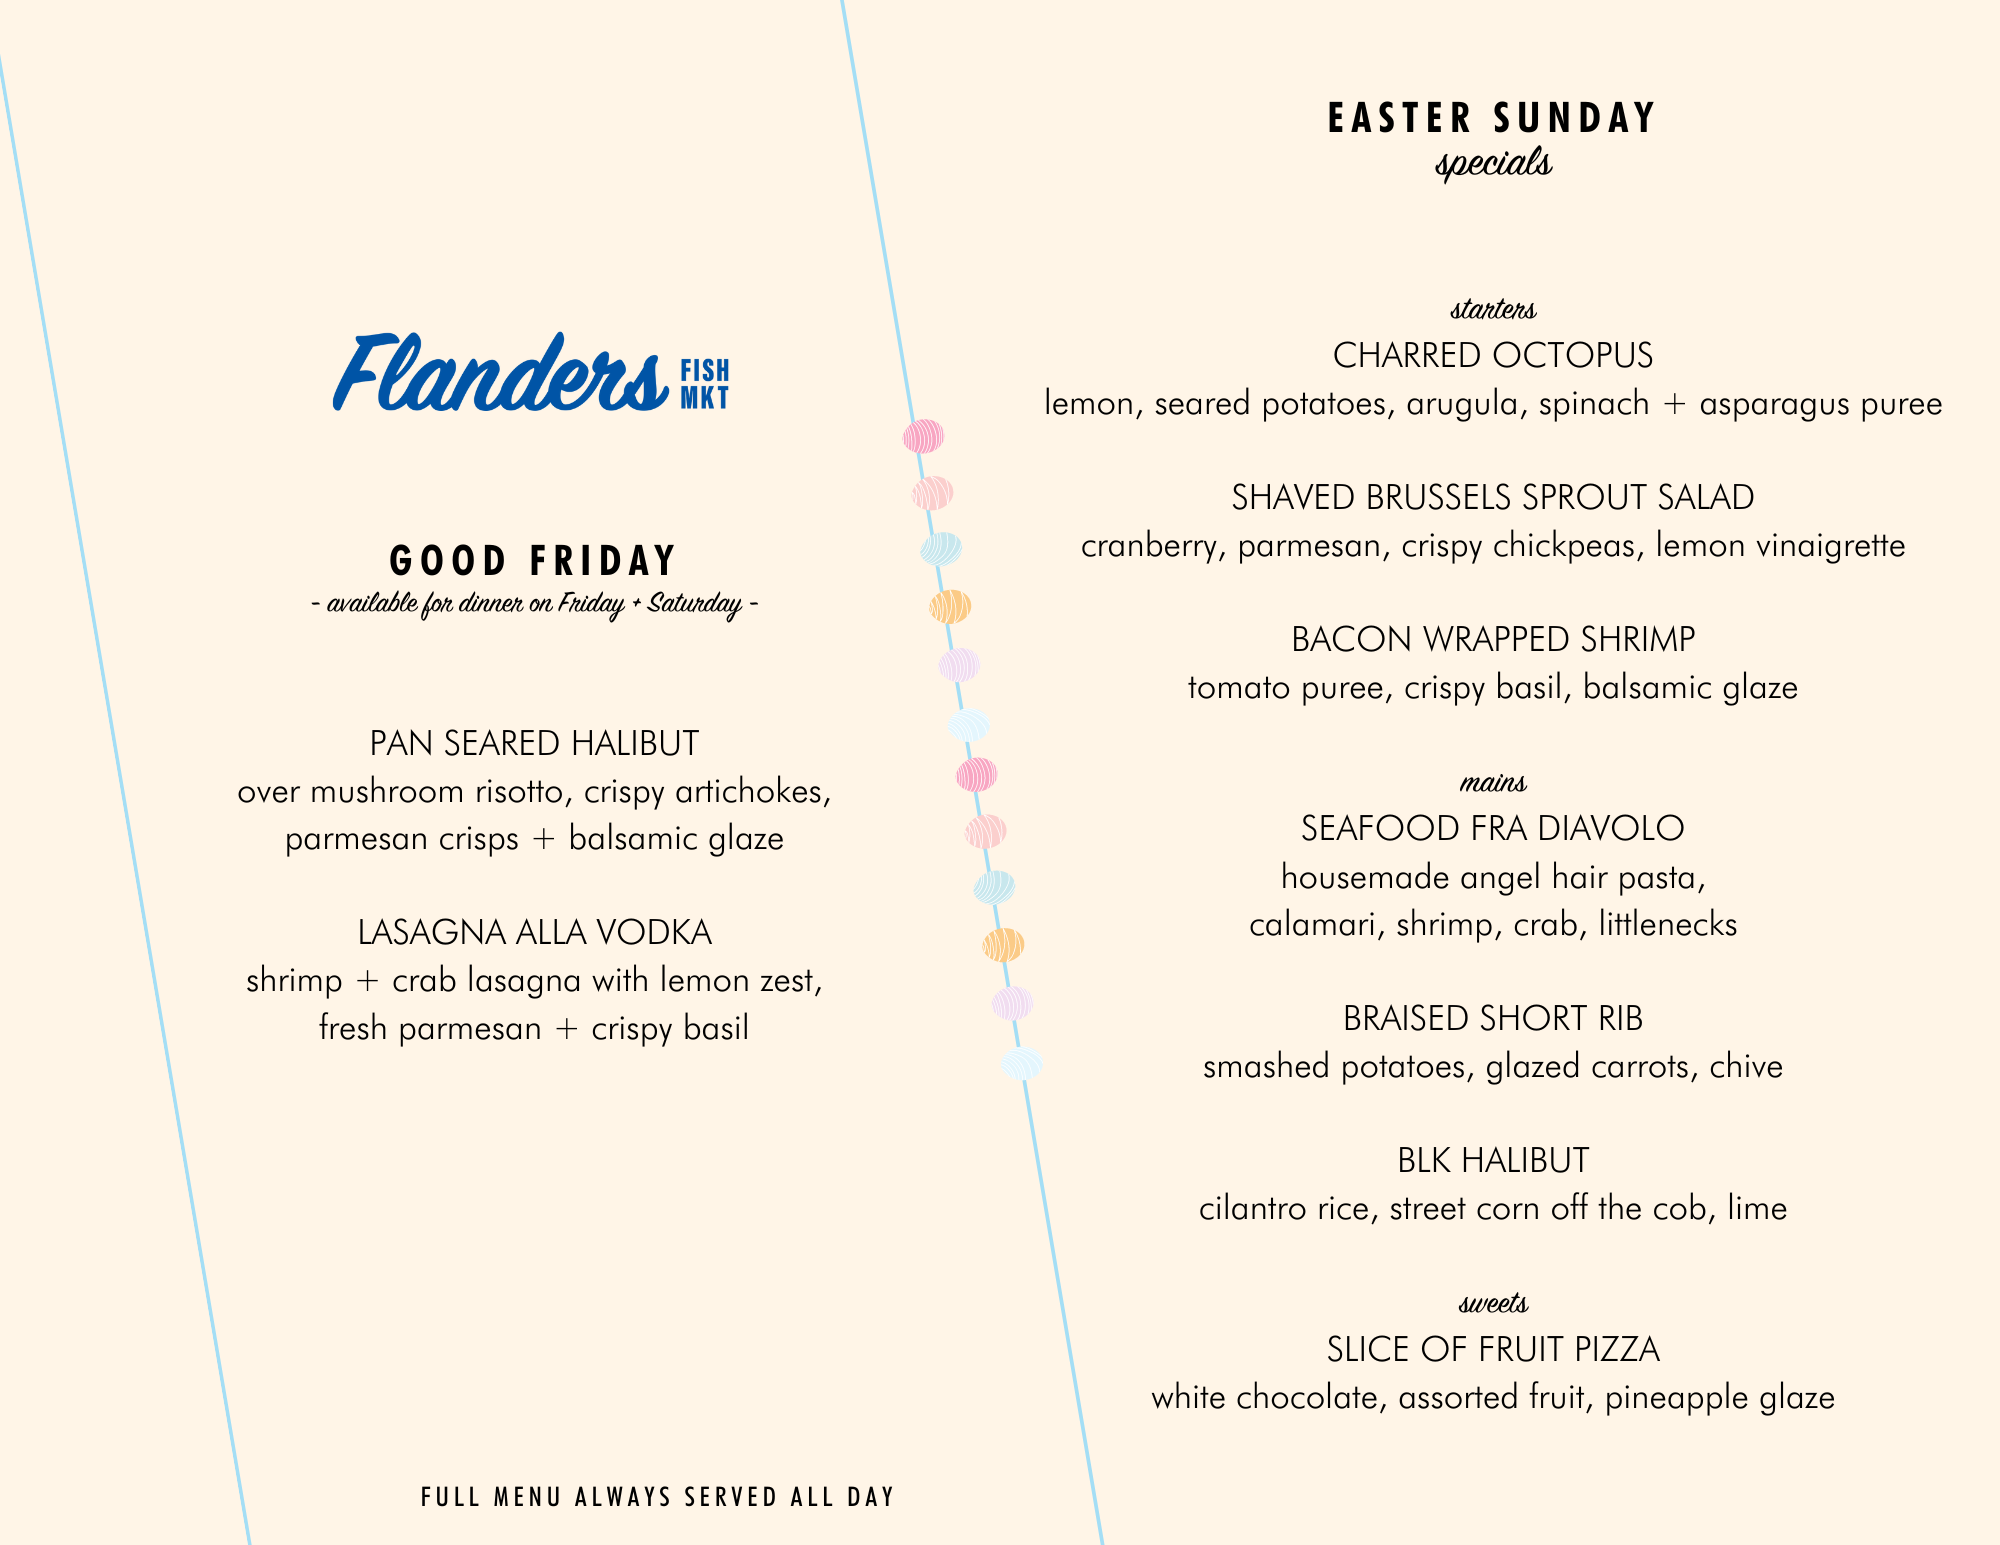 Easter sunday and good friday specials at flanders fish market